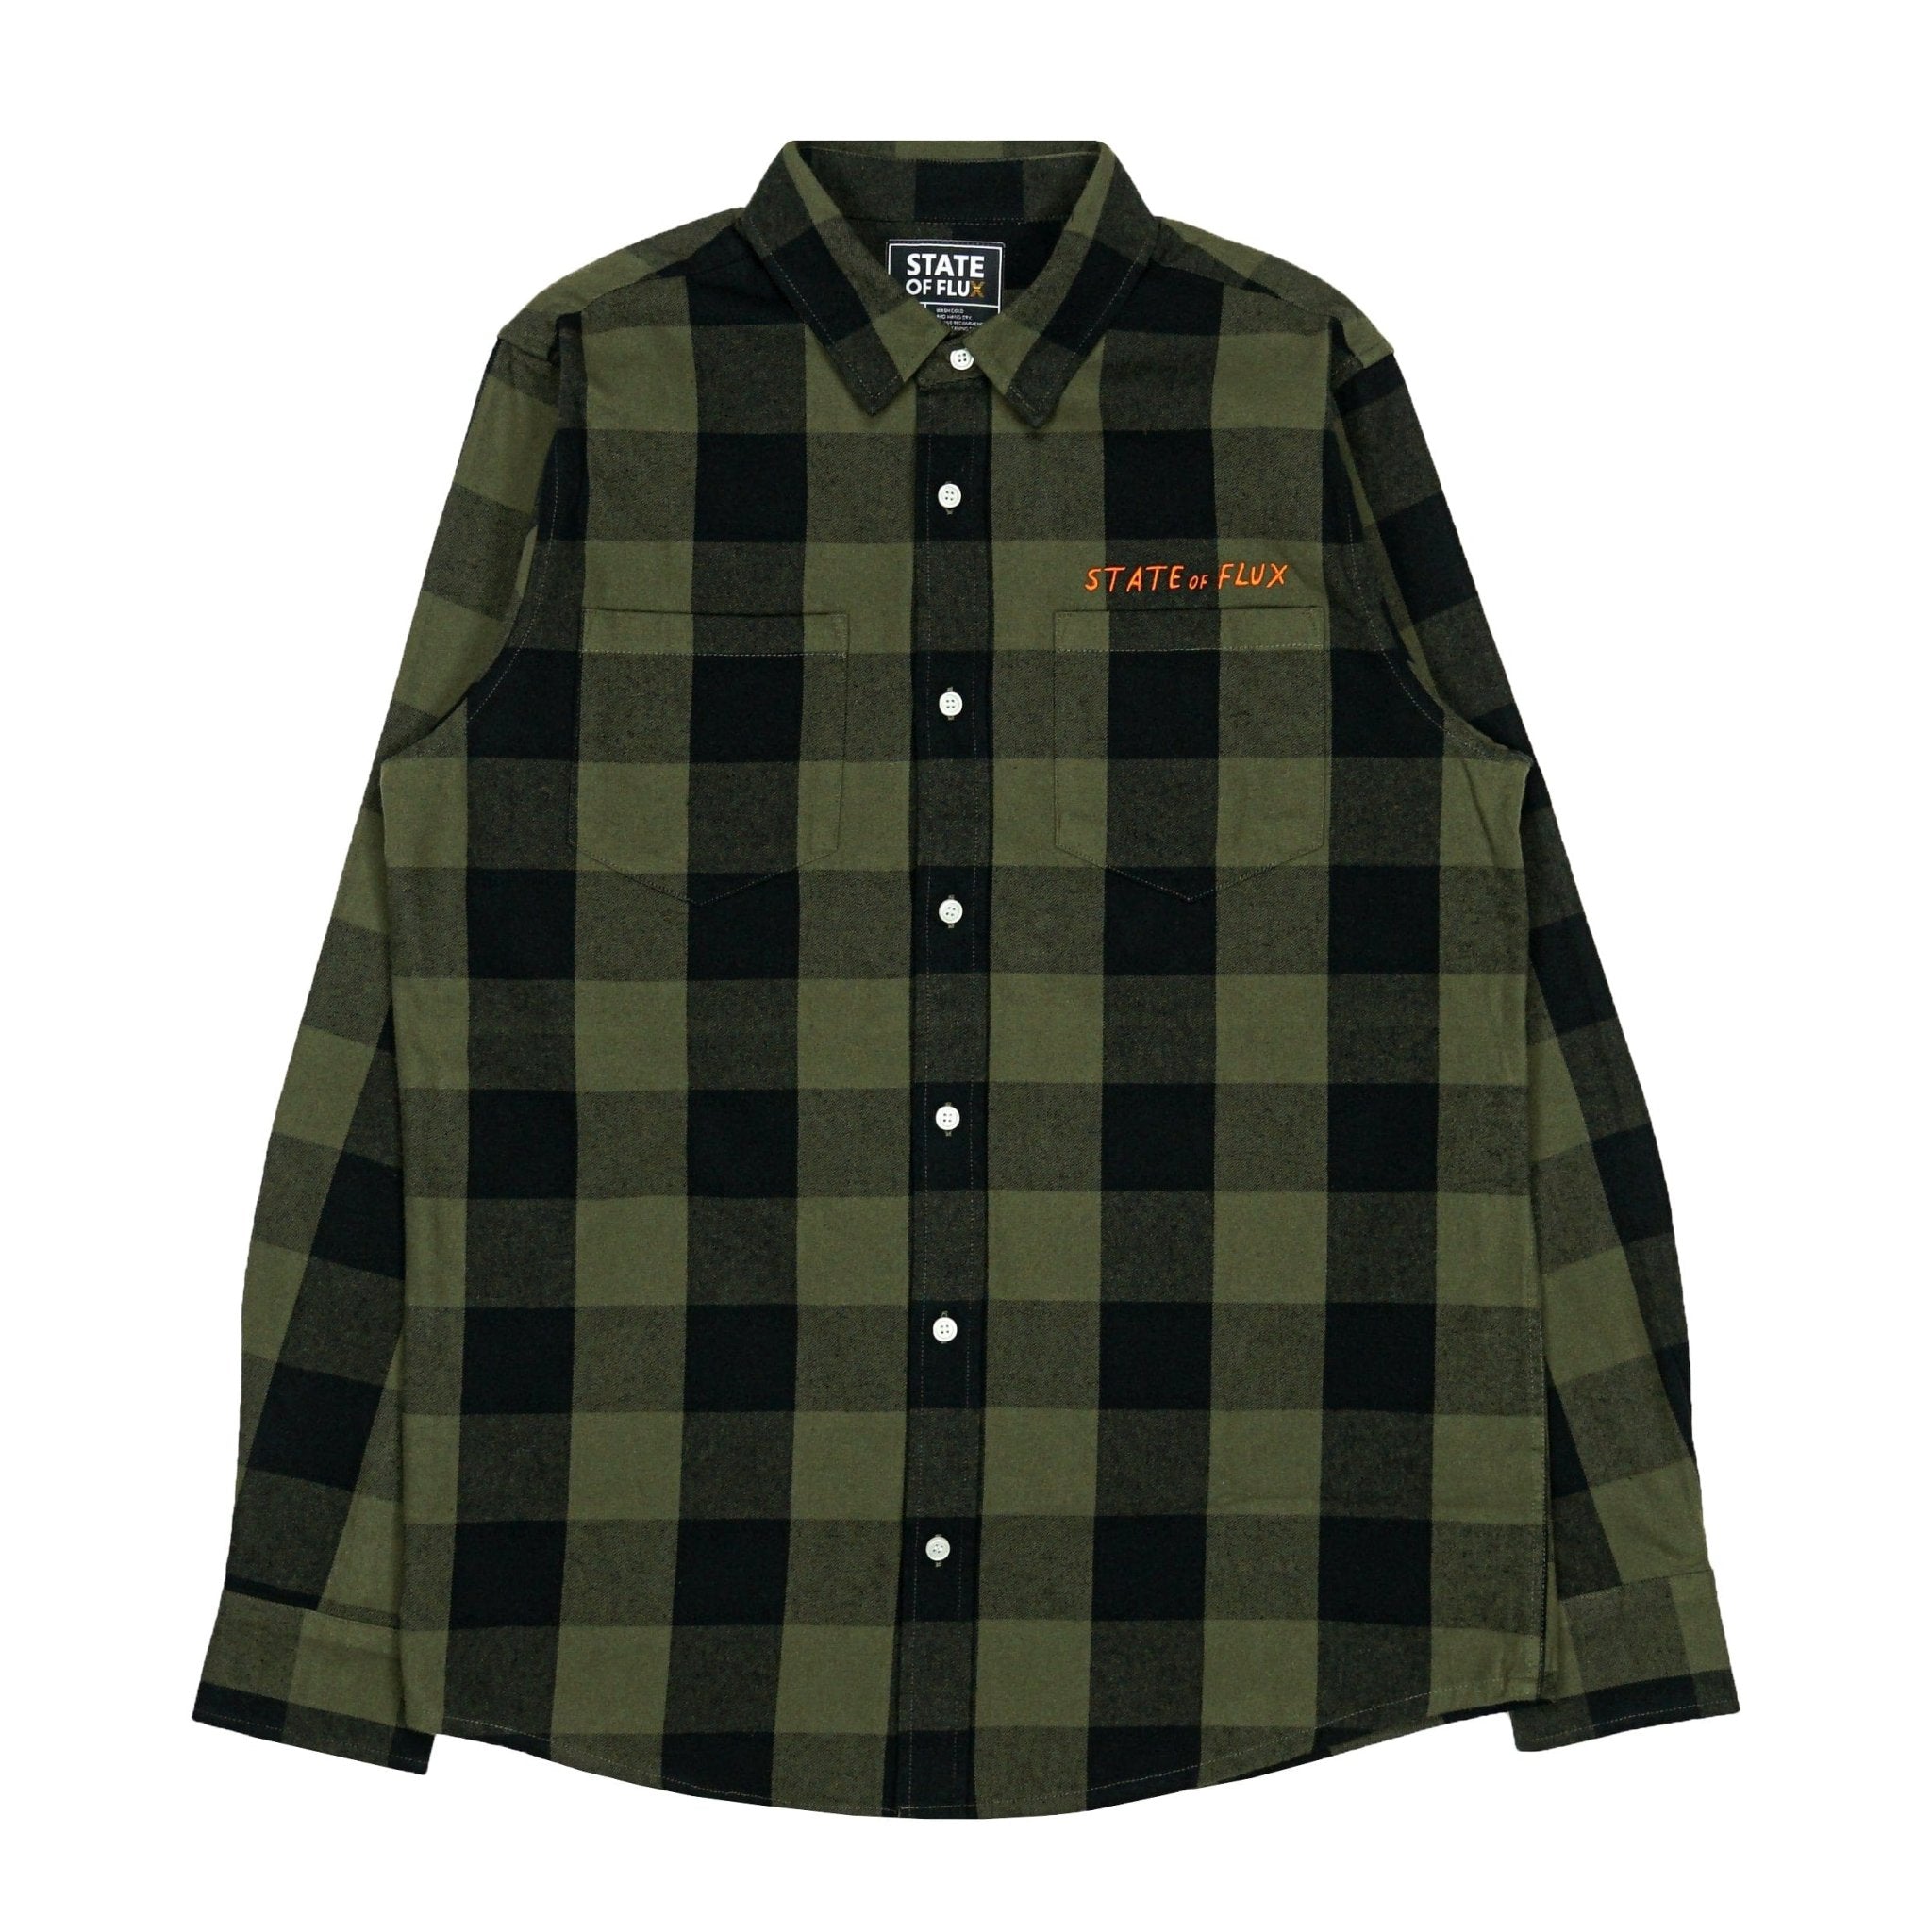 SOF Flannel Button-up in army and black